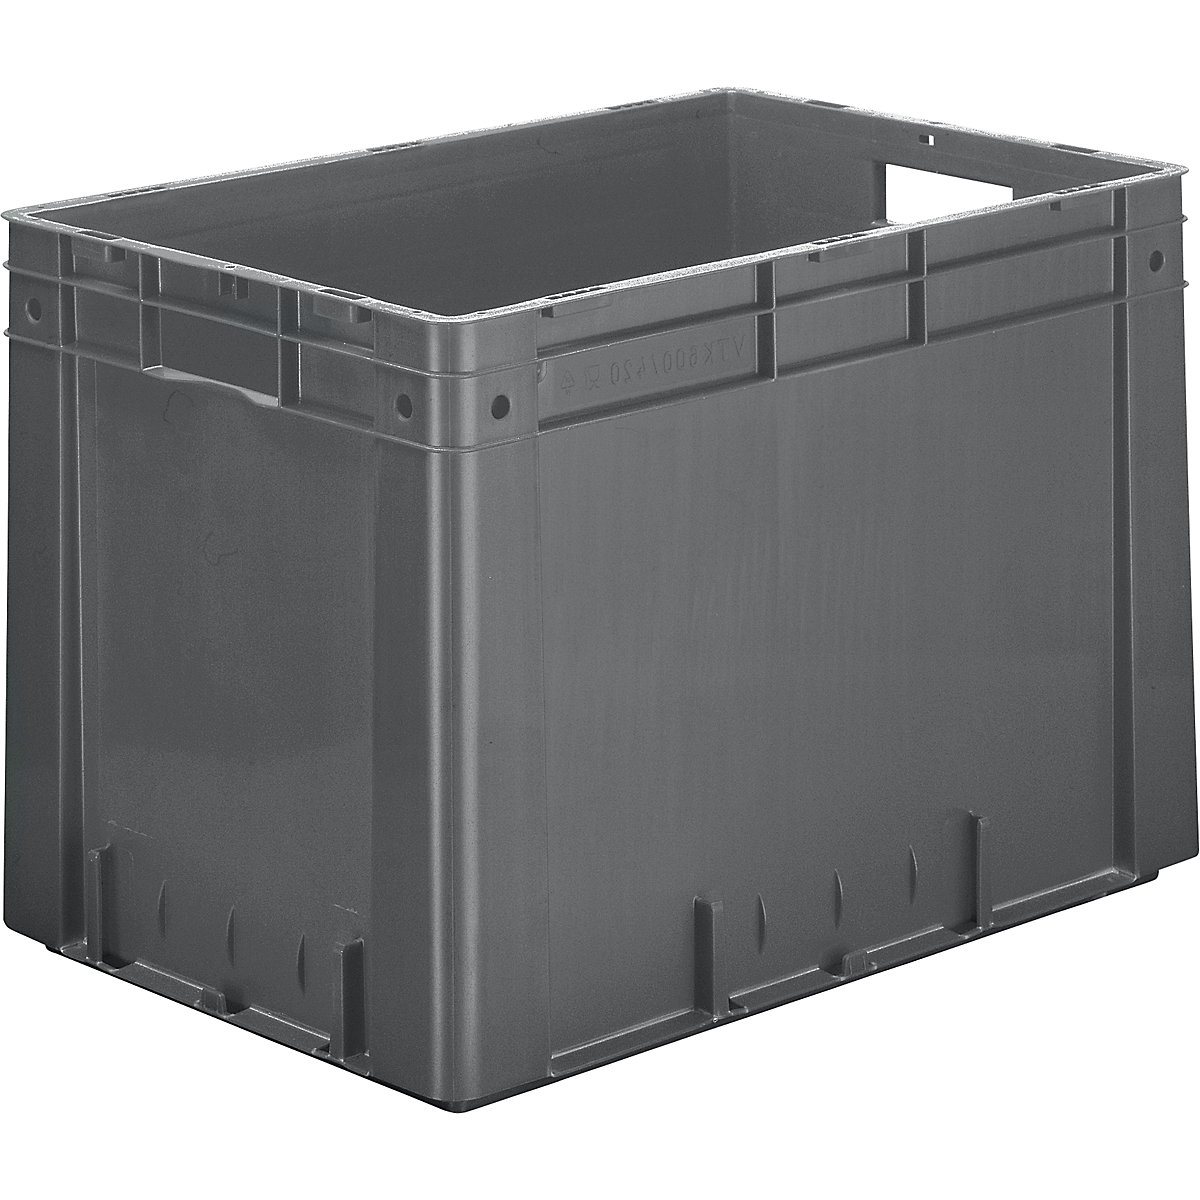 Heavy duty Euro container, polypropylene, capacity 80 l, LxWxH 600 x 400 x 420 mm, solid walls, solid base, grey, pack of 2